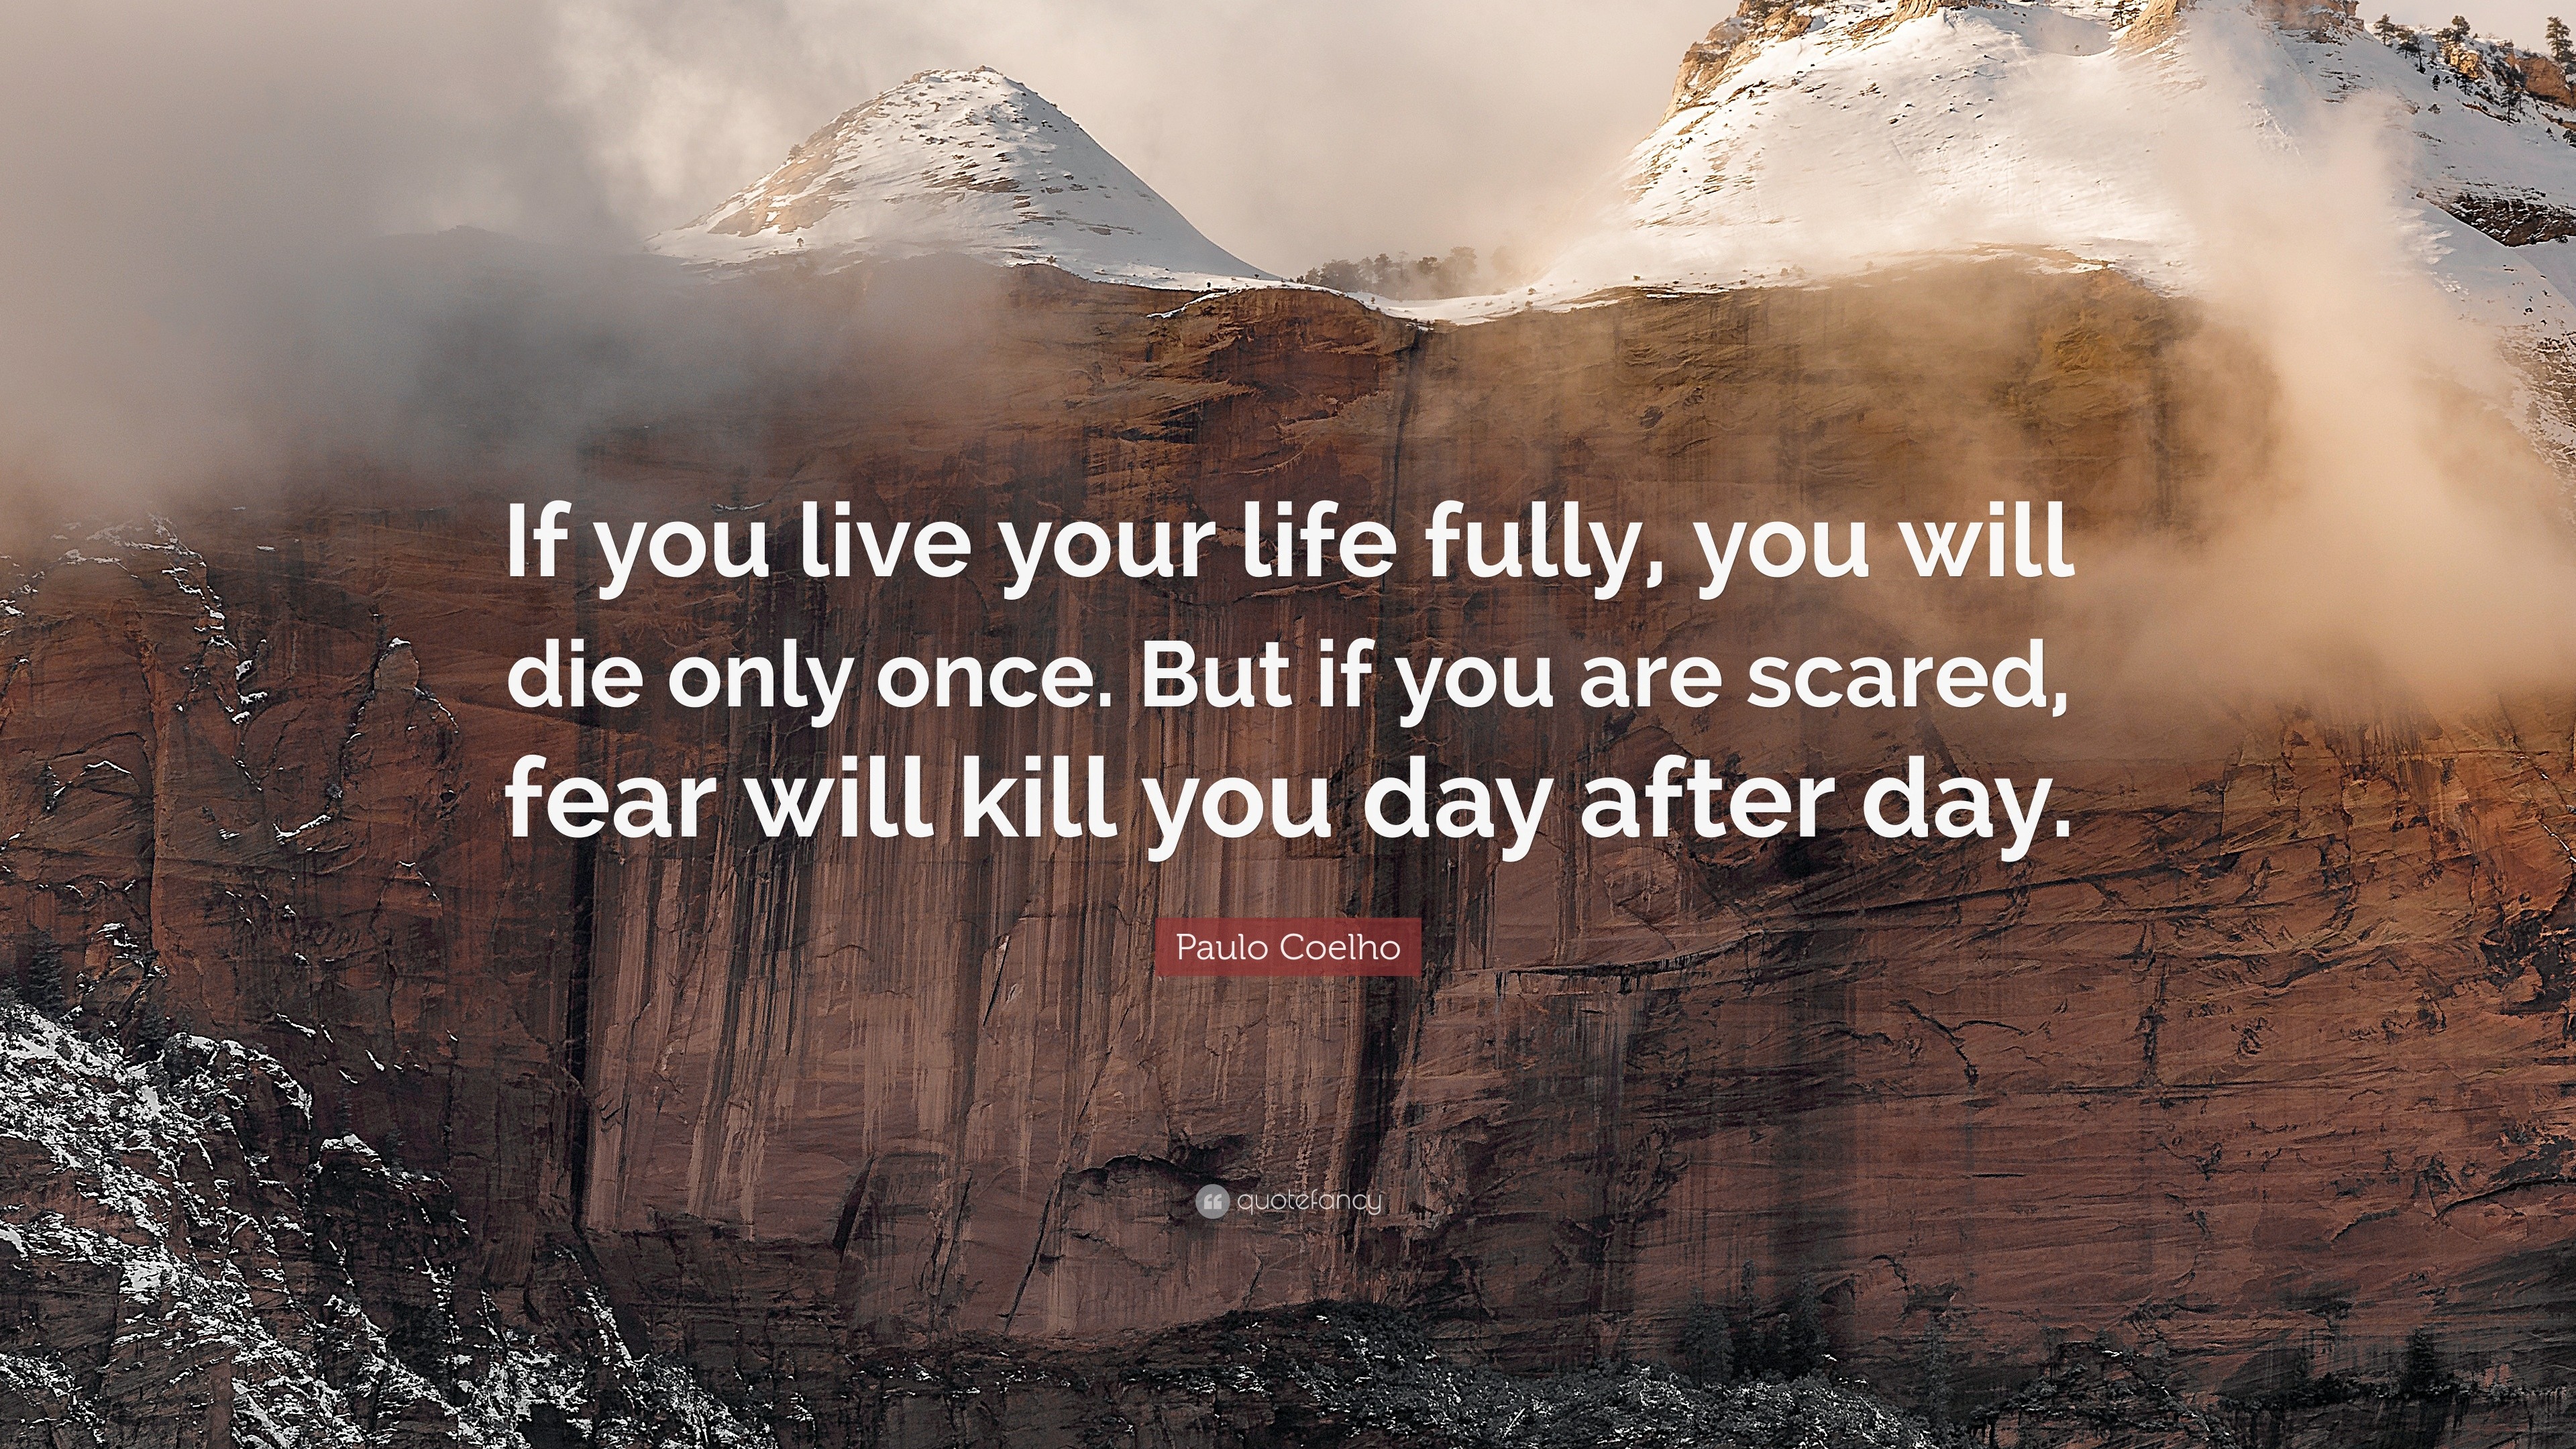 Paulo Coelho Quote “If you live your life fully you will only